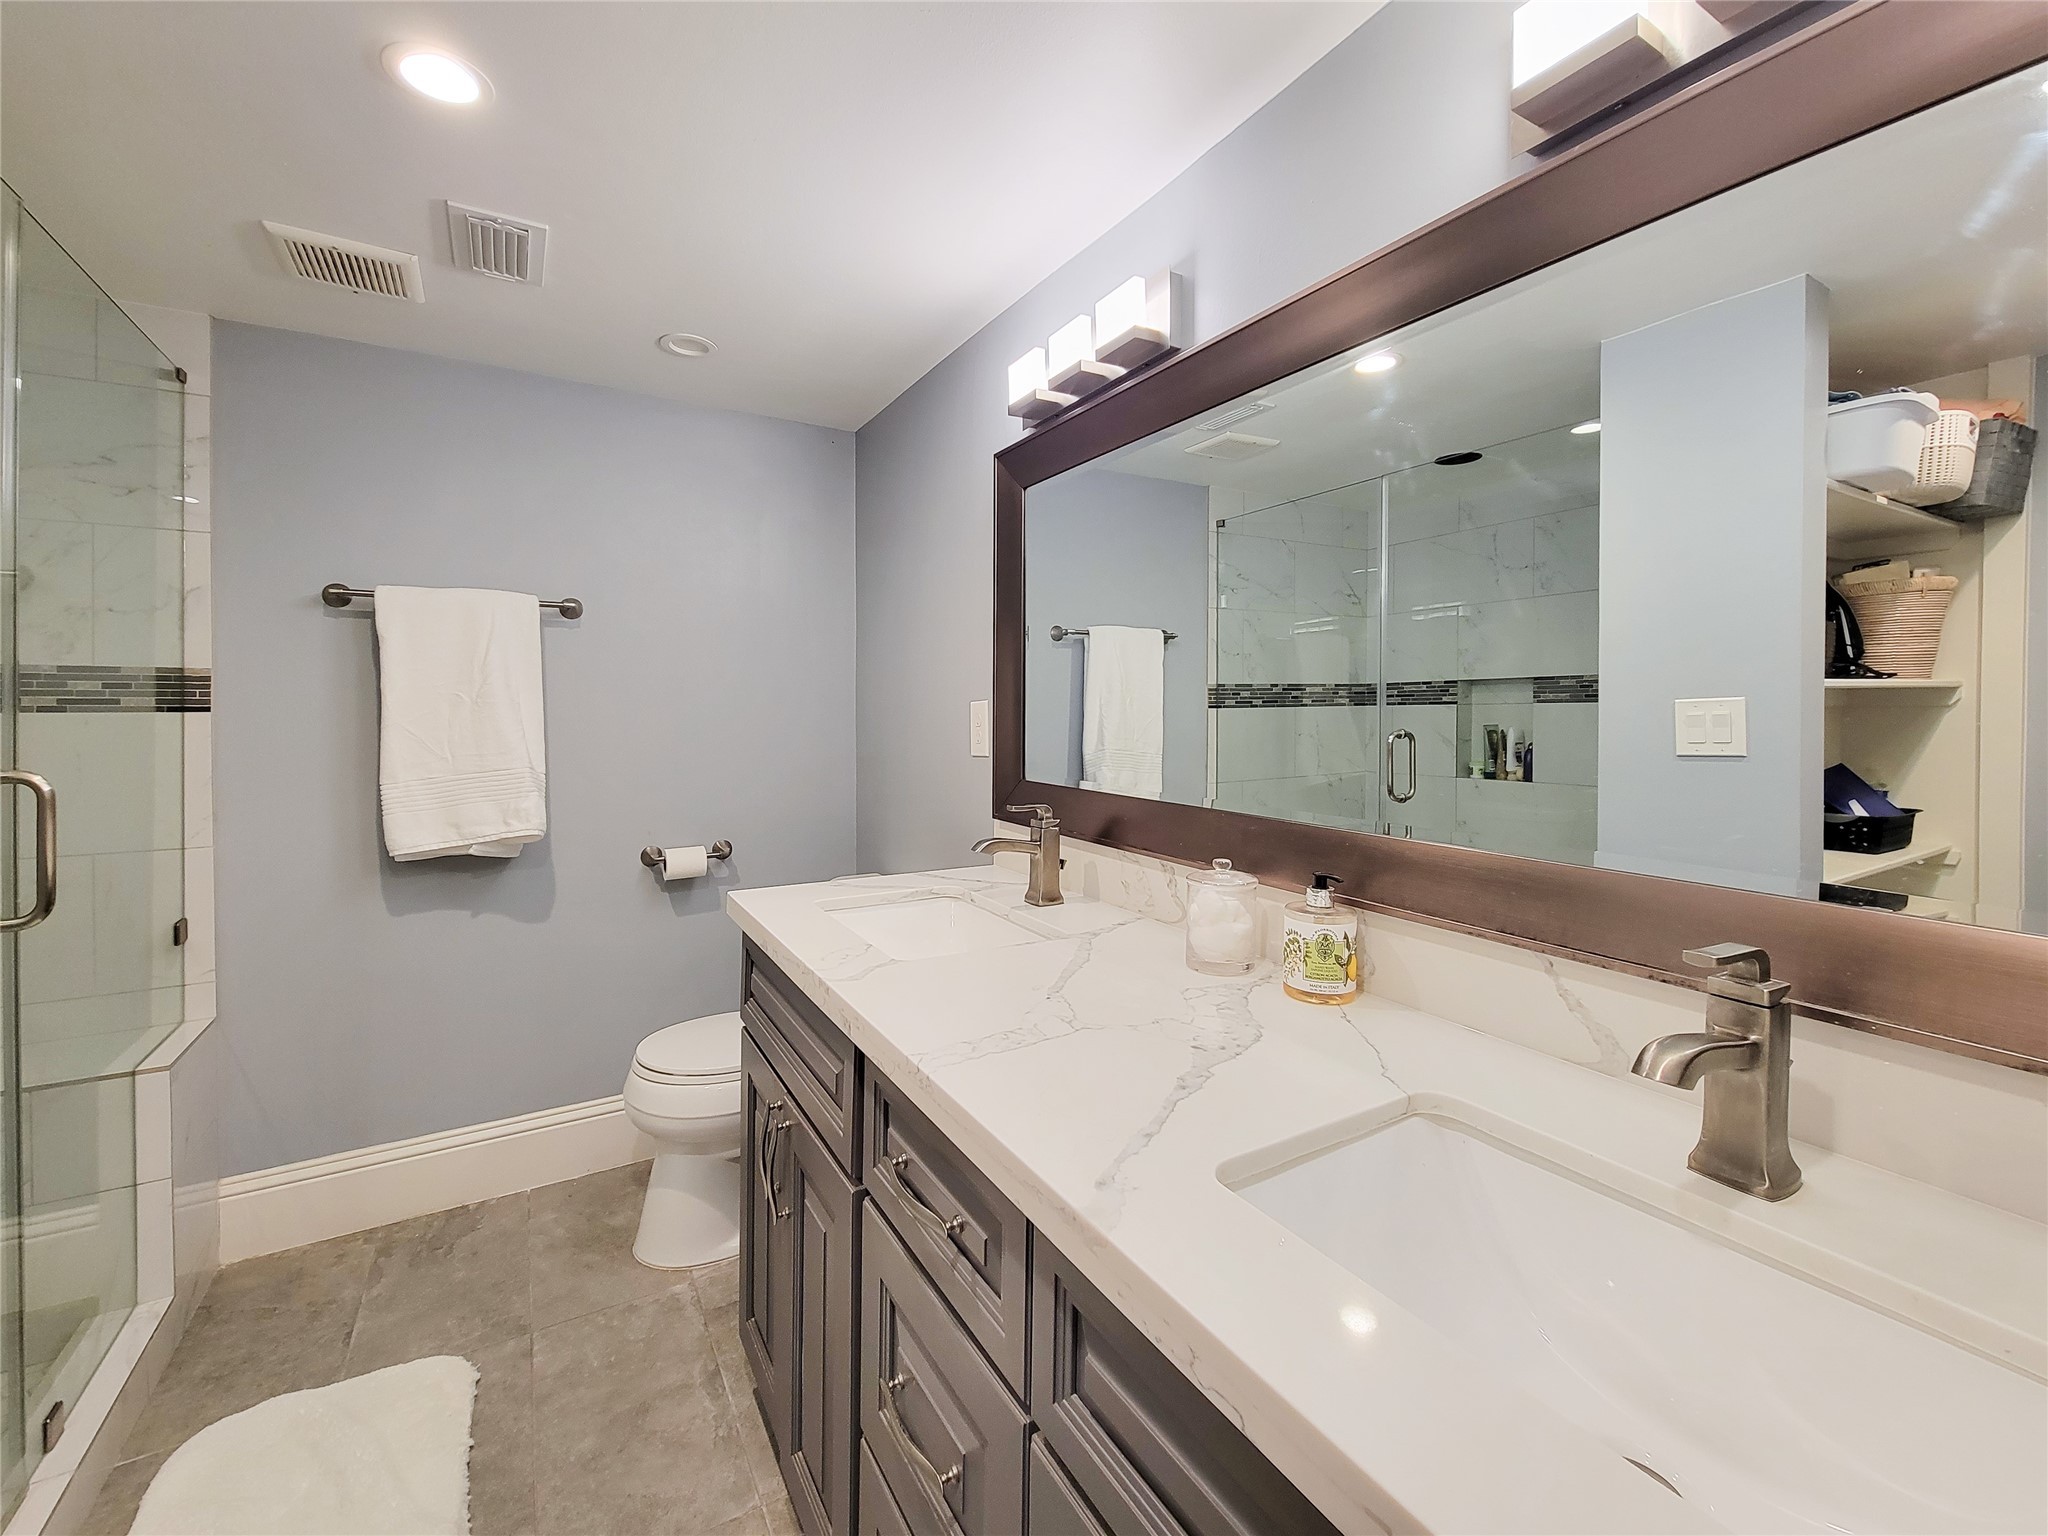 A beautiful new bathroom is designed with efficiency and functionality in mind. Double vanities with a durable and beautiful quartz countertop along with a large walk in shower with a built in bench are just a few well chosen design elements.